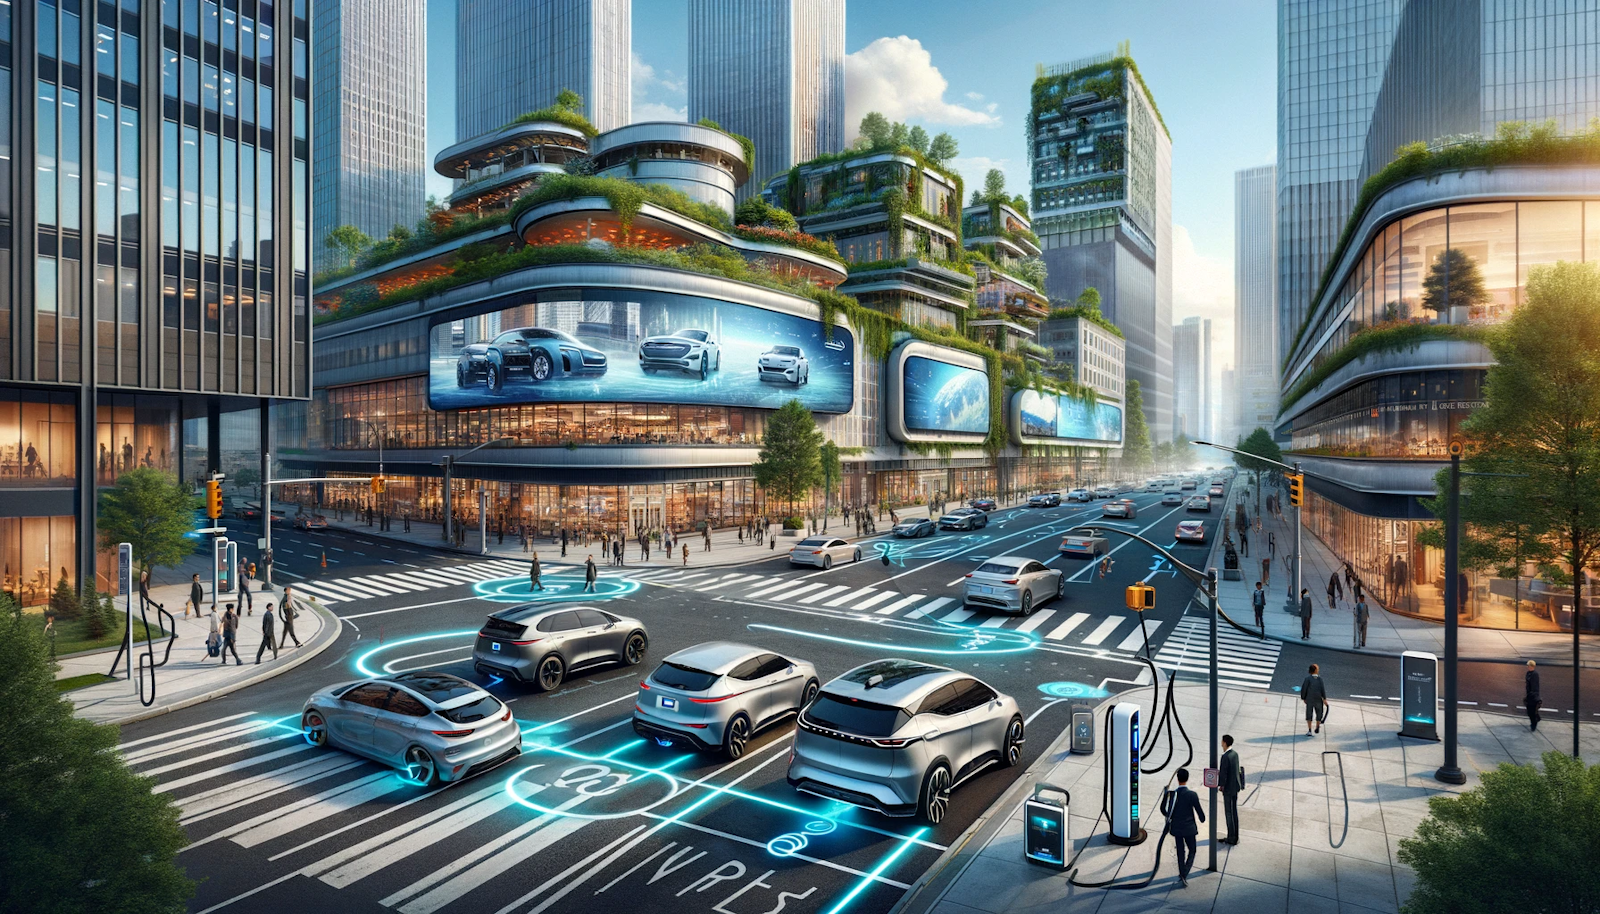 Bustling city intersection with diverse electric vehicles using wireless charging technology, surrounded by digital billboards promoting EV advancements, amidst buildings with vertical gardens and solar panels, showcasing a sustainable and innovative urban future.